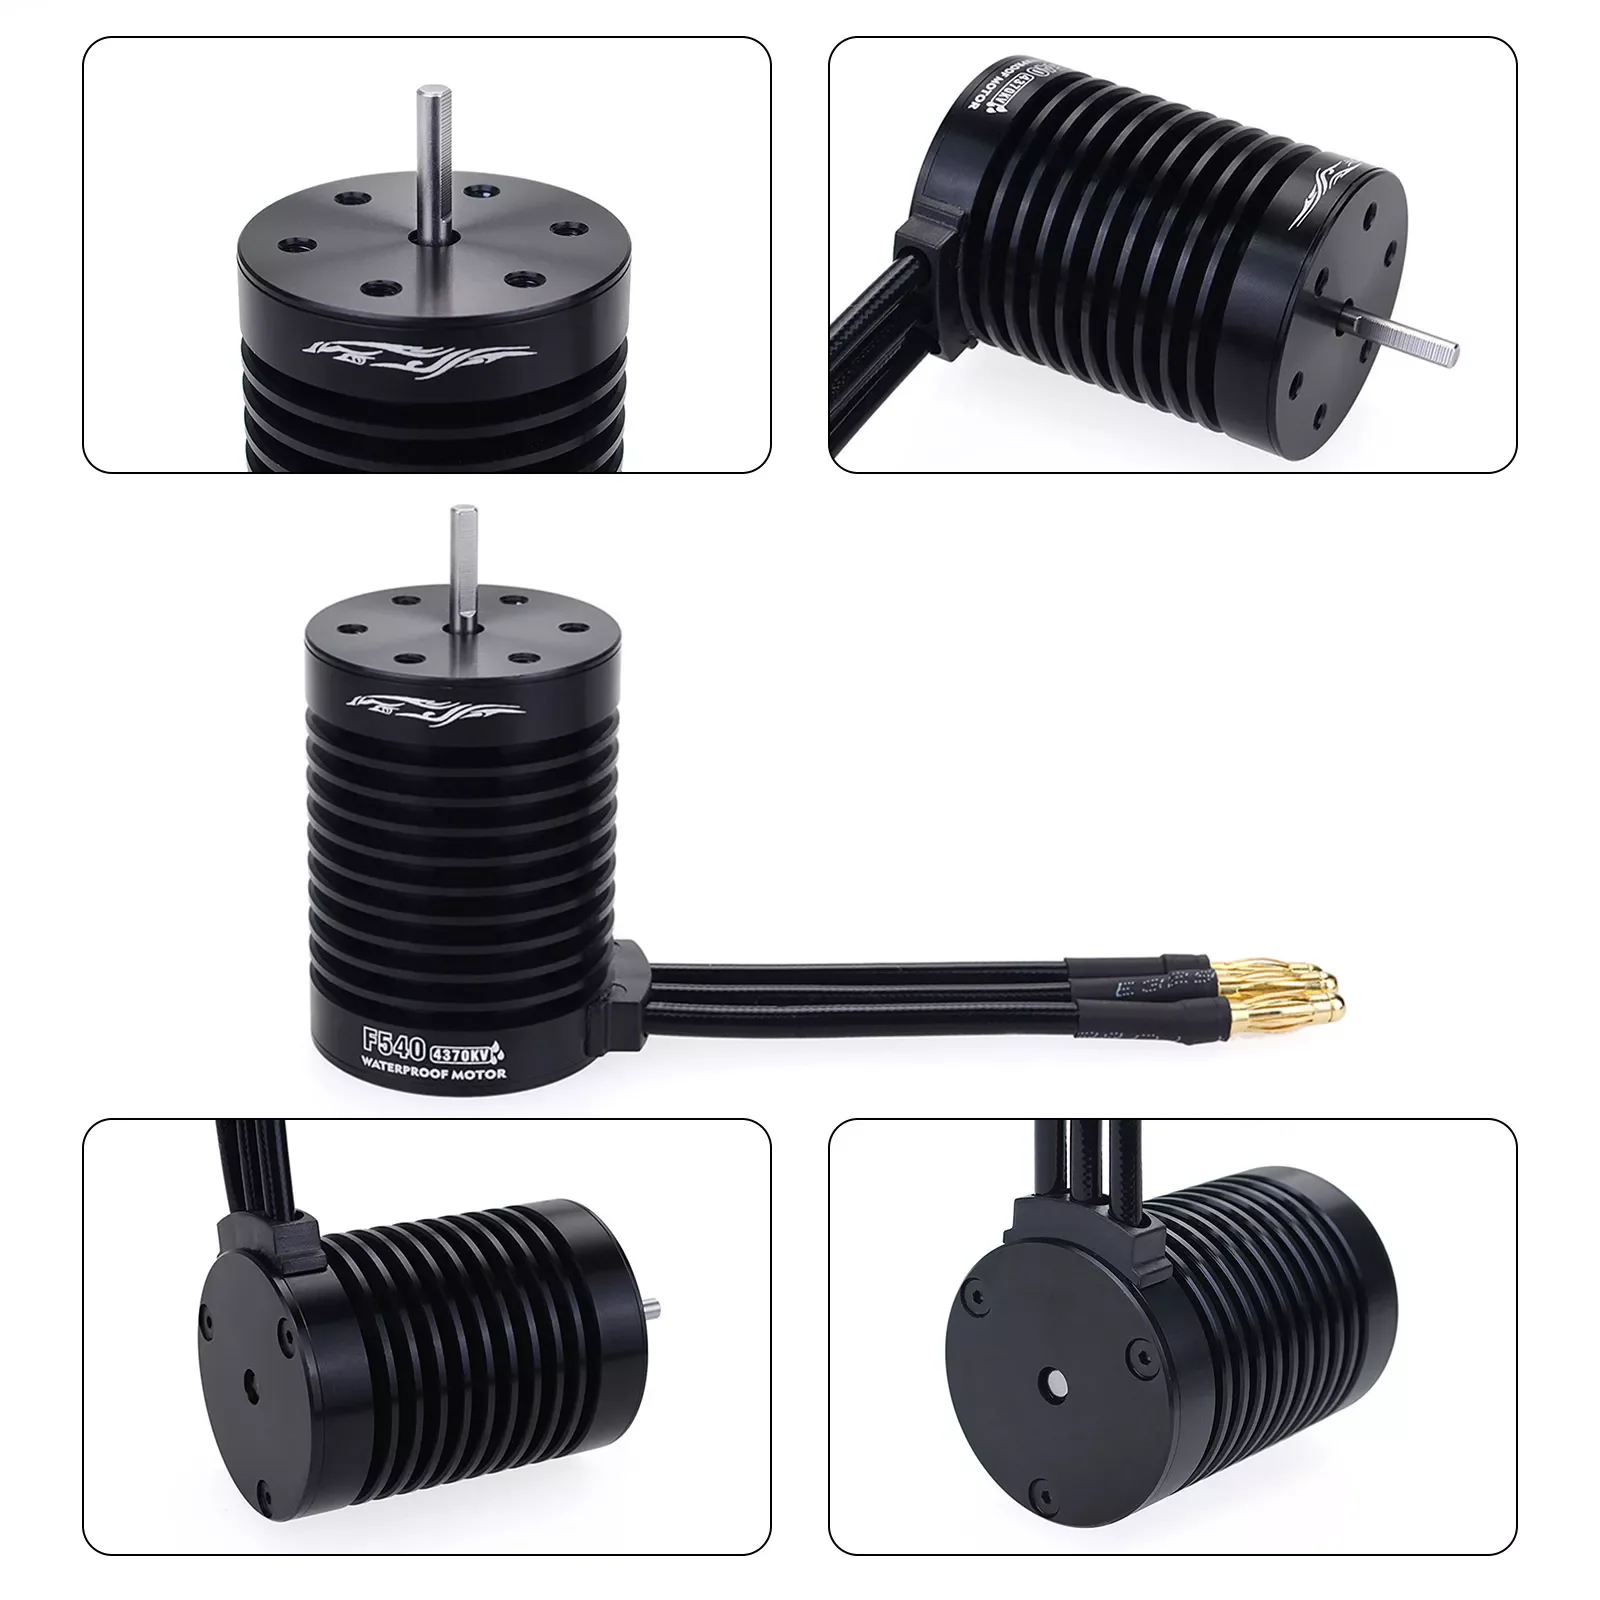 RC Part Waterproof for 1/10 RC Car Replacement Waterproof Combo Brushless Motor 60A Brushless Combo Kits enlarge